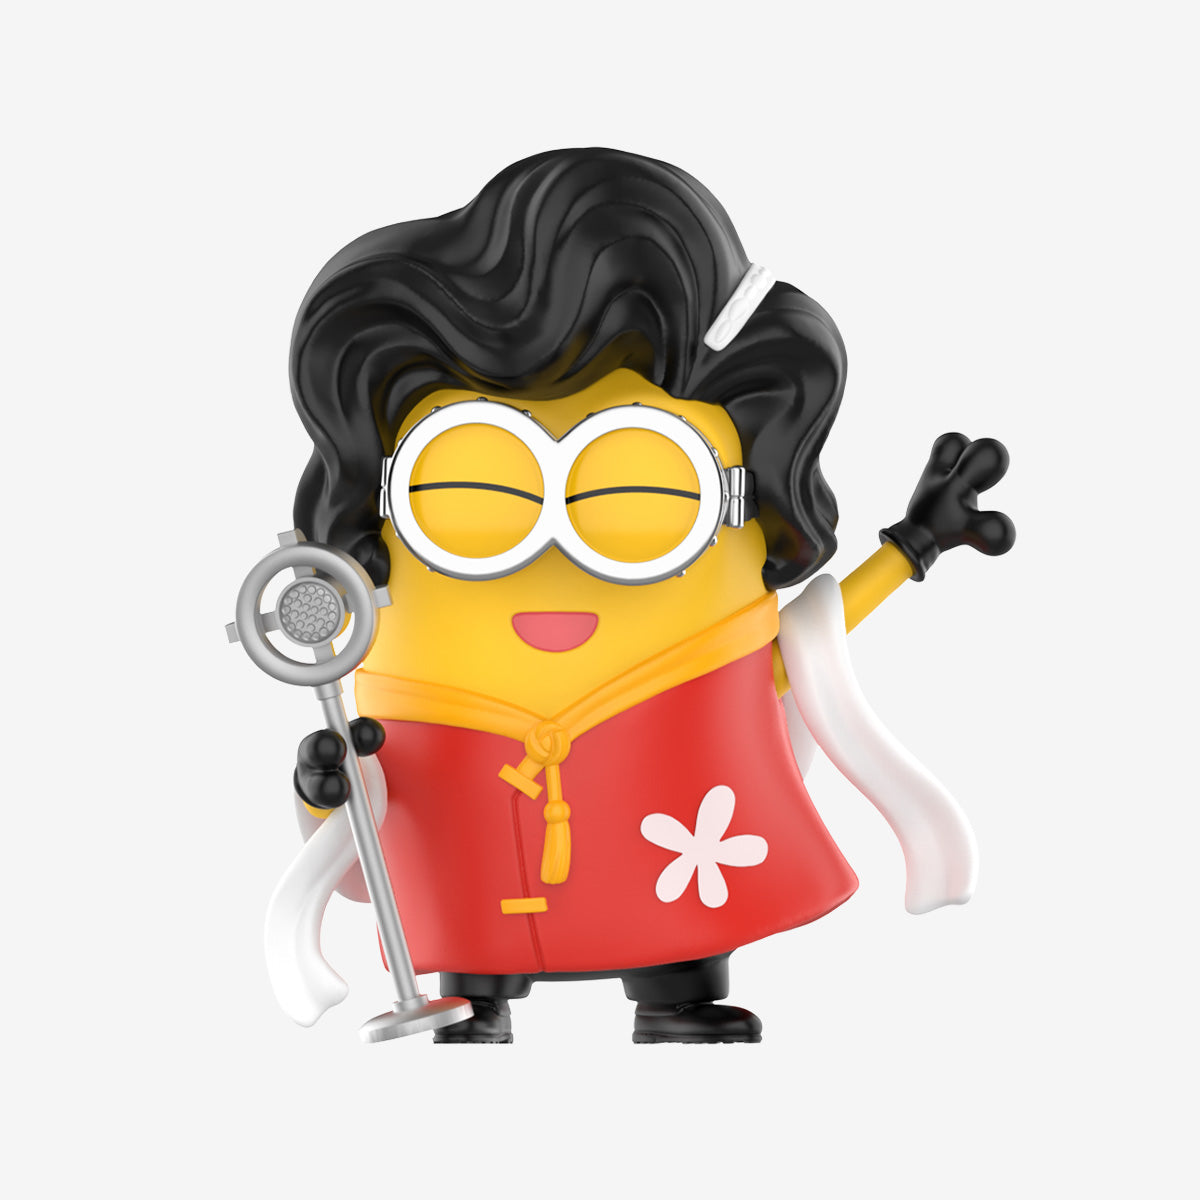 【NEW】Pop Mart Minions Travelogues of China Series Blind Box Figure